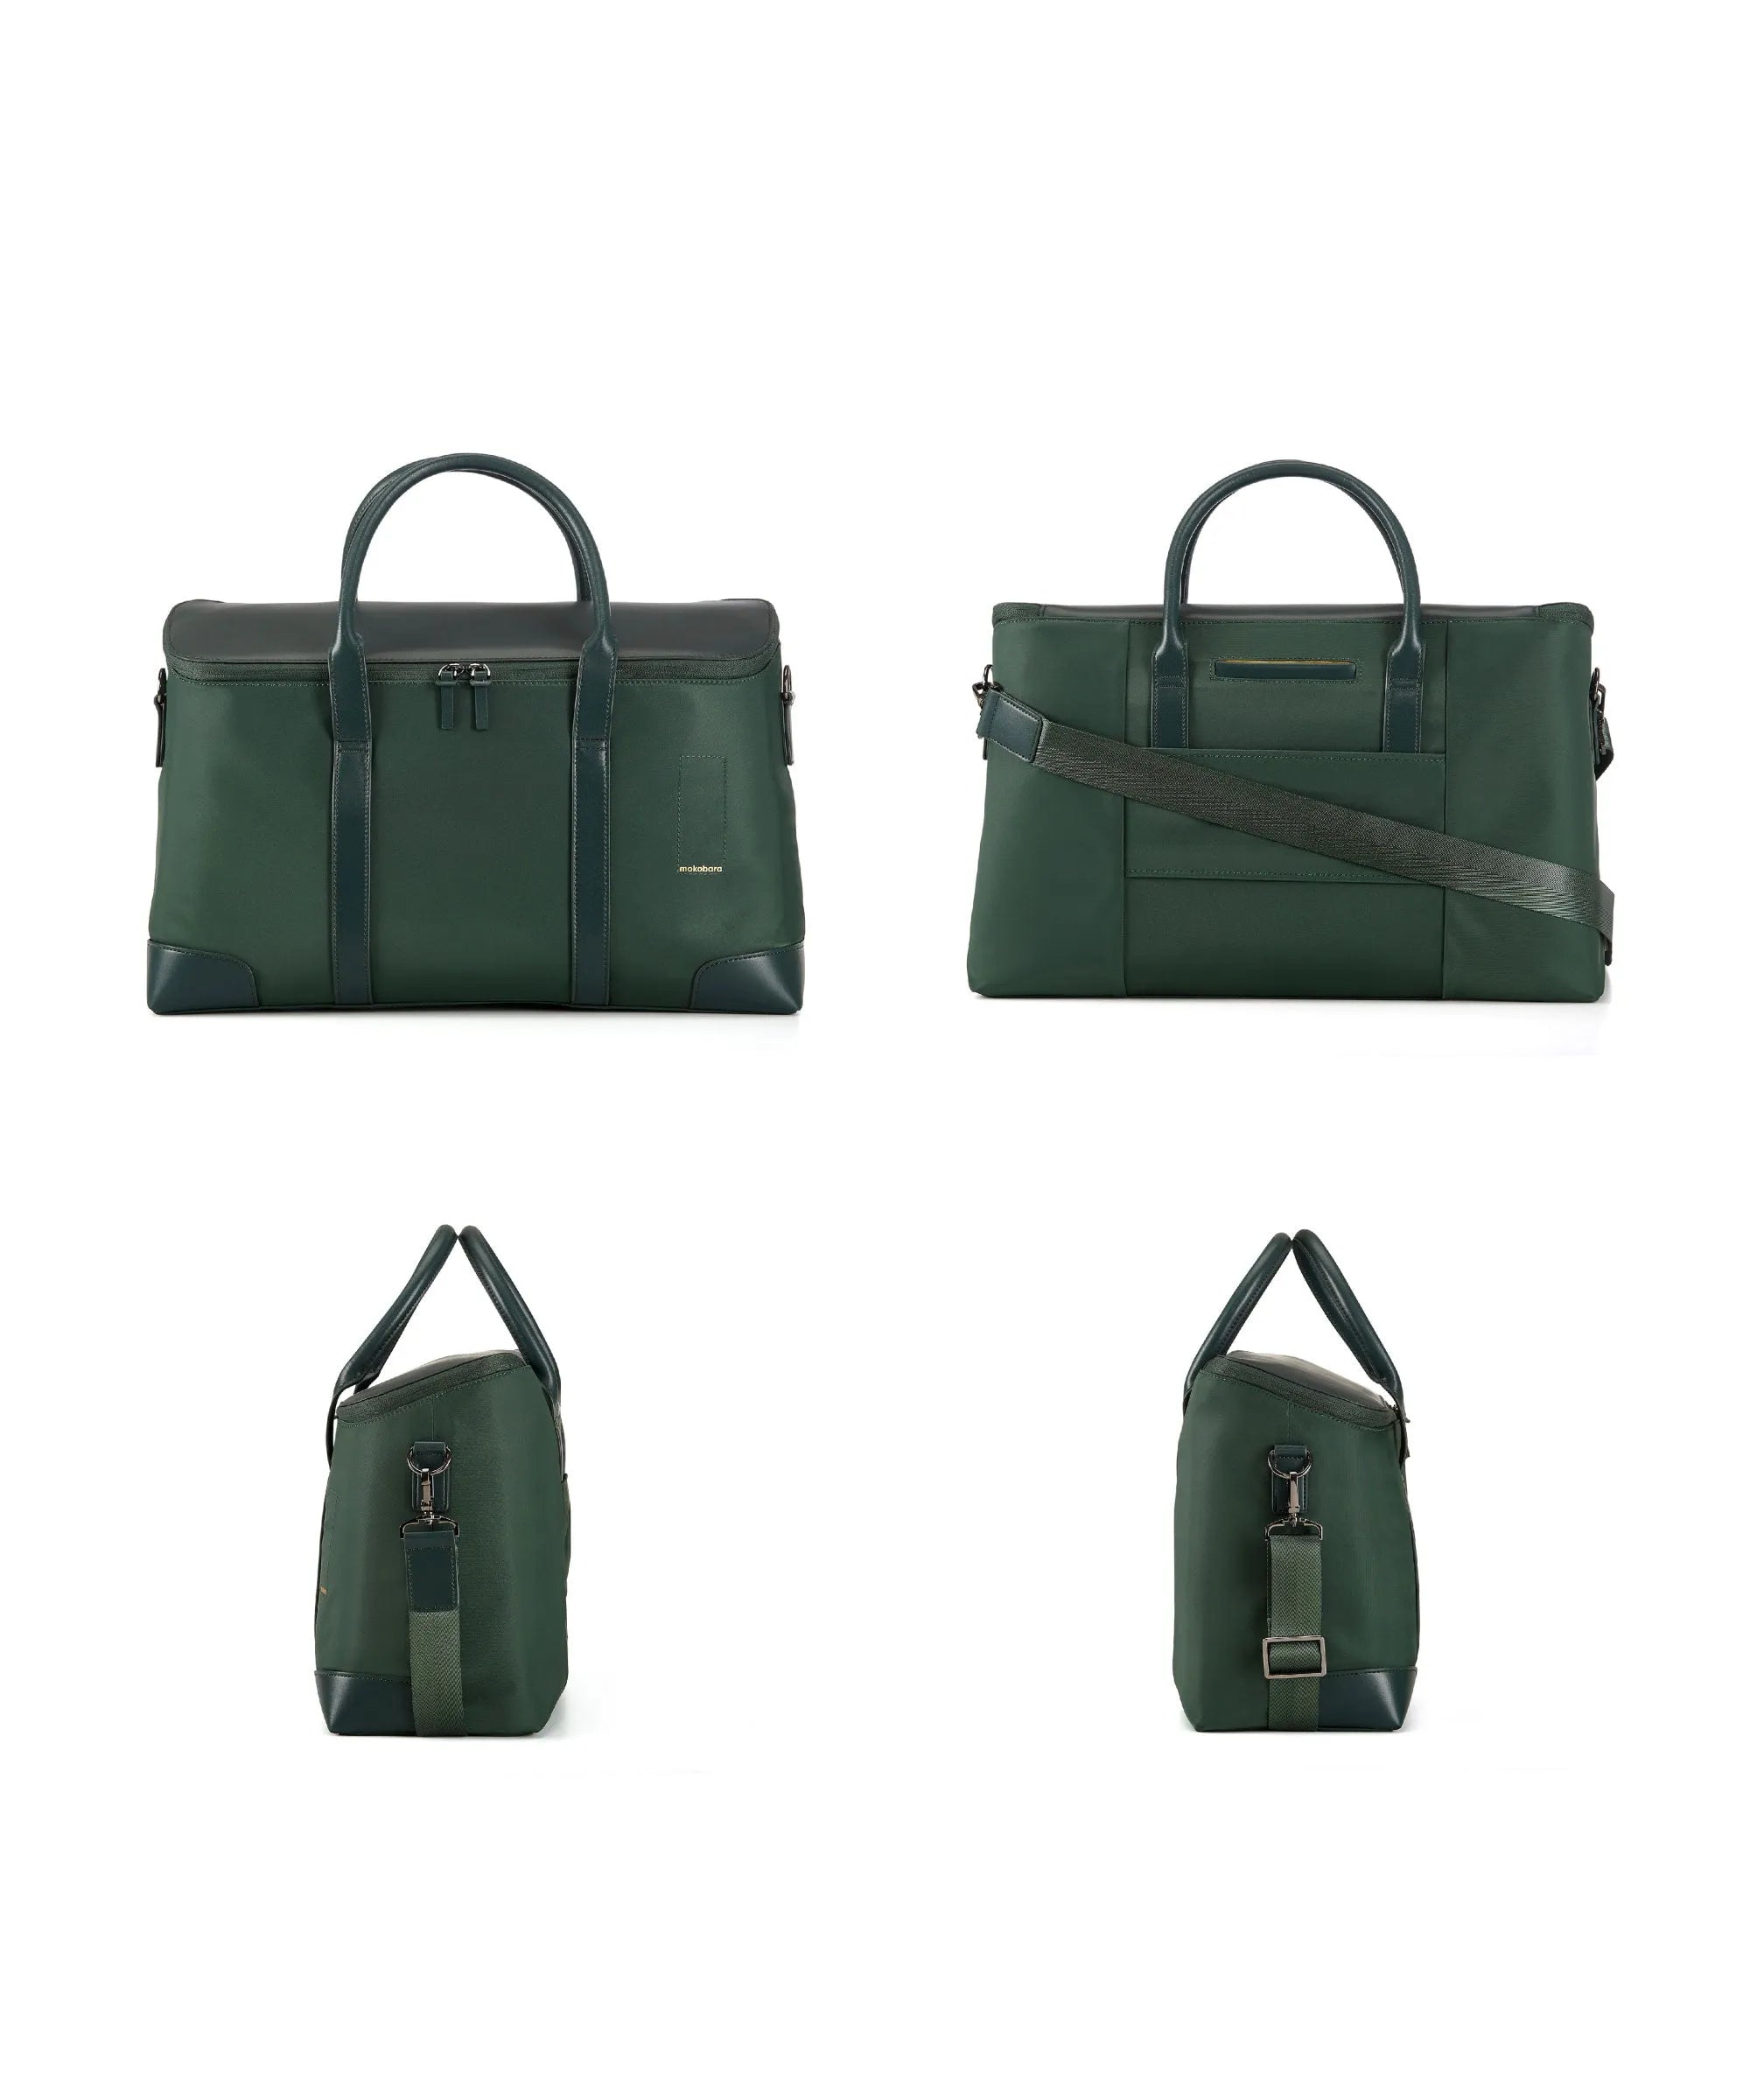 Color_Lawn party (Limited Edition) | The Cabin Duffle